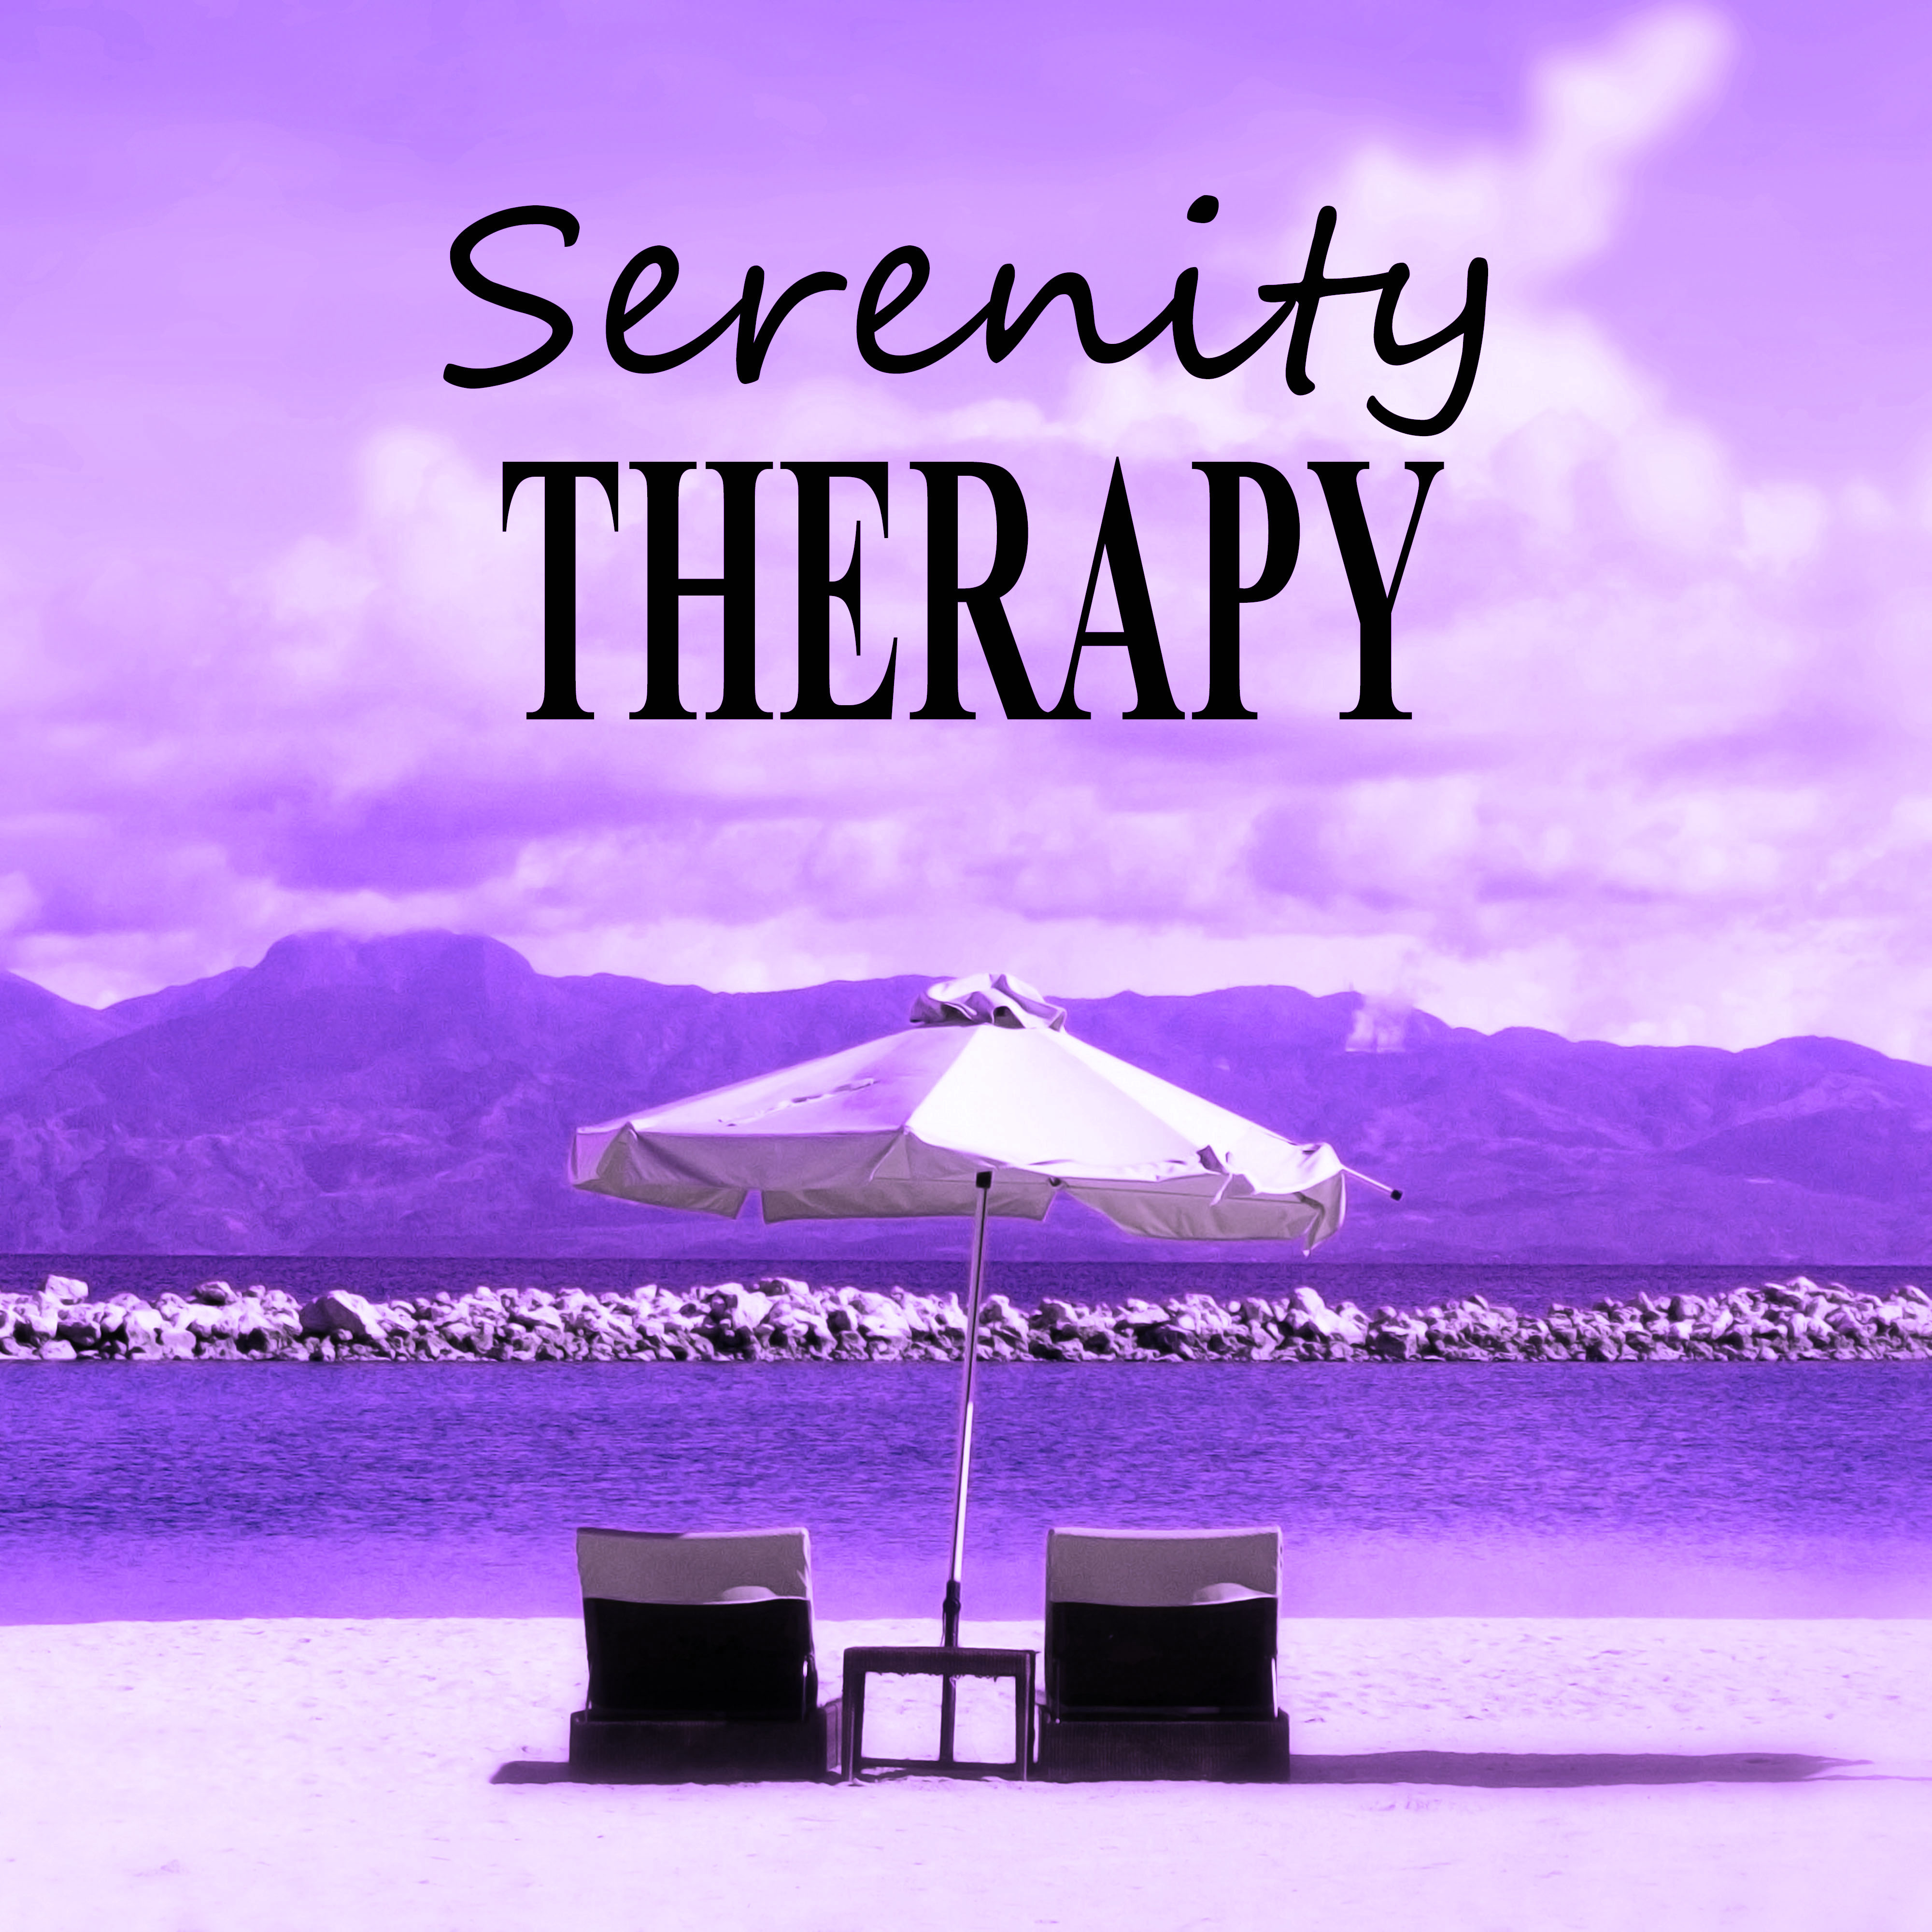 Serenity Therapy - Spa Sounds, Deep Sleep, Meditation, Yoga, Healing Music, Relaxing Therapy, Calm Music, Easy Listening